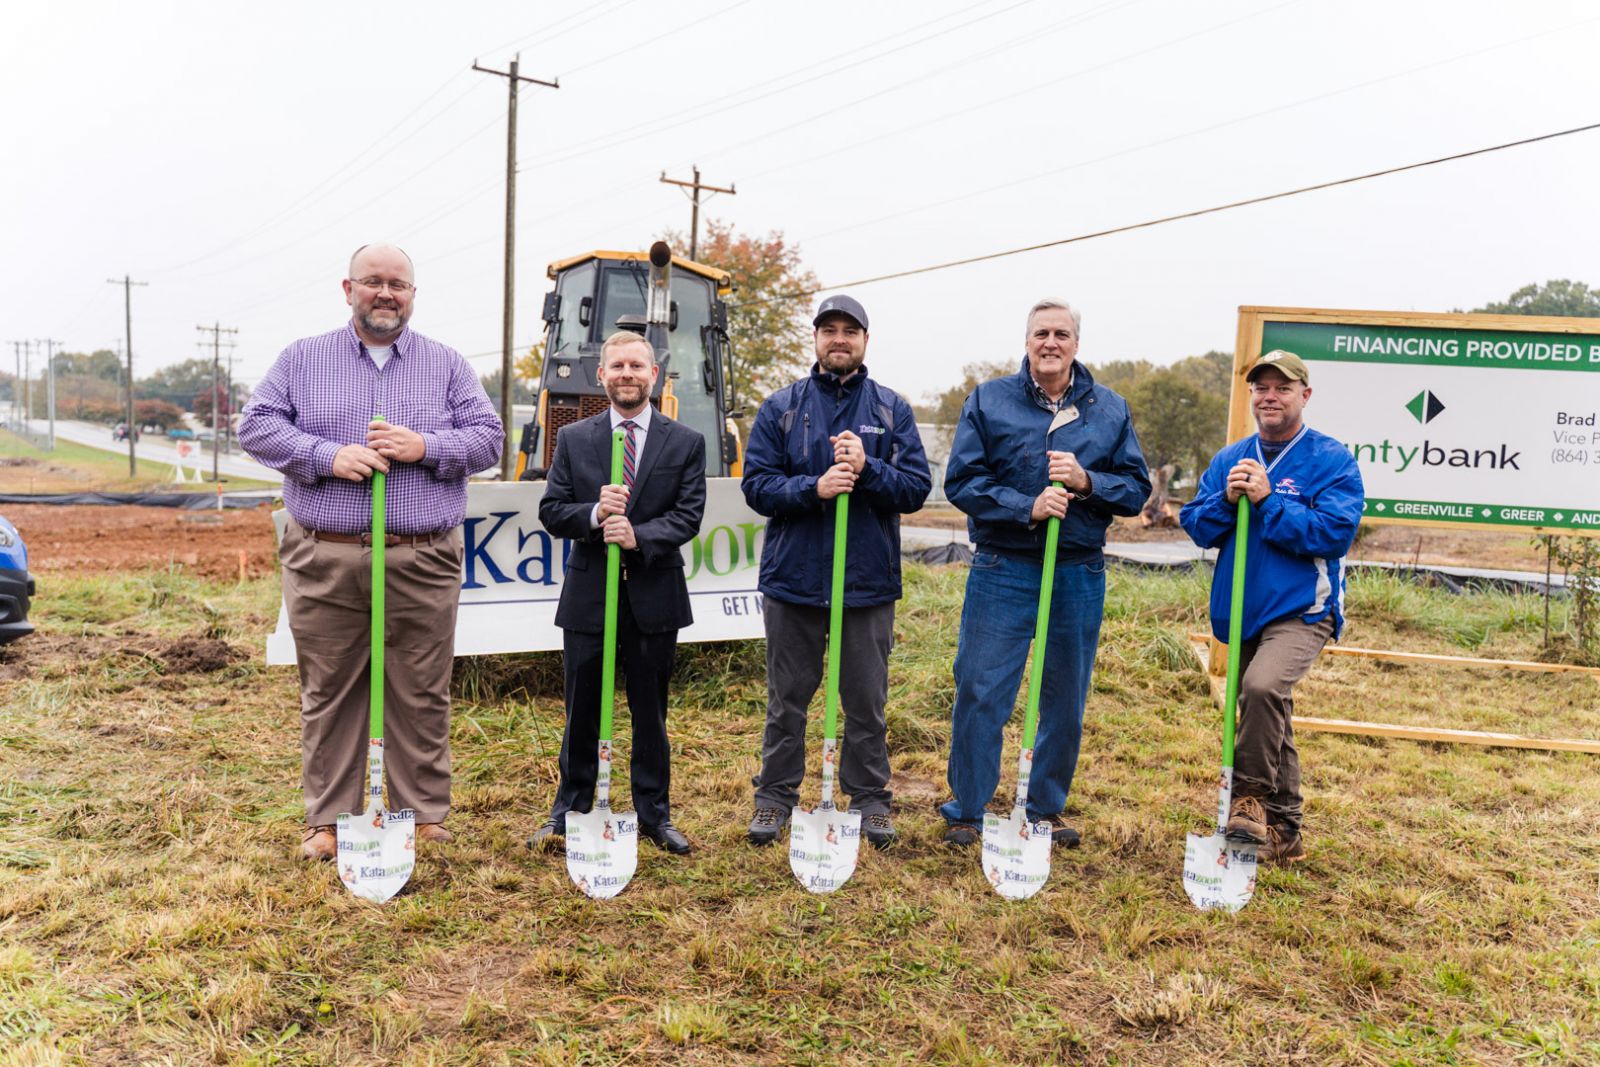 Mark Hopper, Greer City Council member; Brad Cantrell, vice president and SBA business development officer of Countybank; Tom Hyll, president of Katazoom; Greer Mayor Rick Danner; and Kevin Cushman, owner of Cushman Millen Construction (left to right), were present for the groundbreaking. (Photo/Provided)